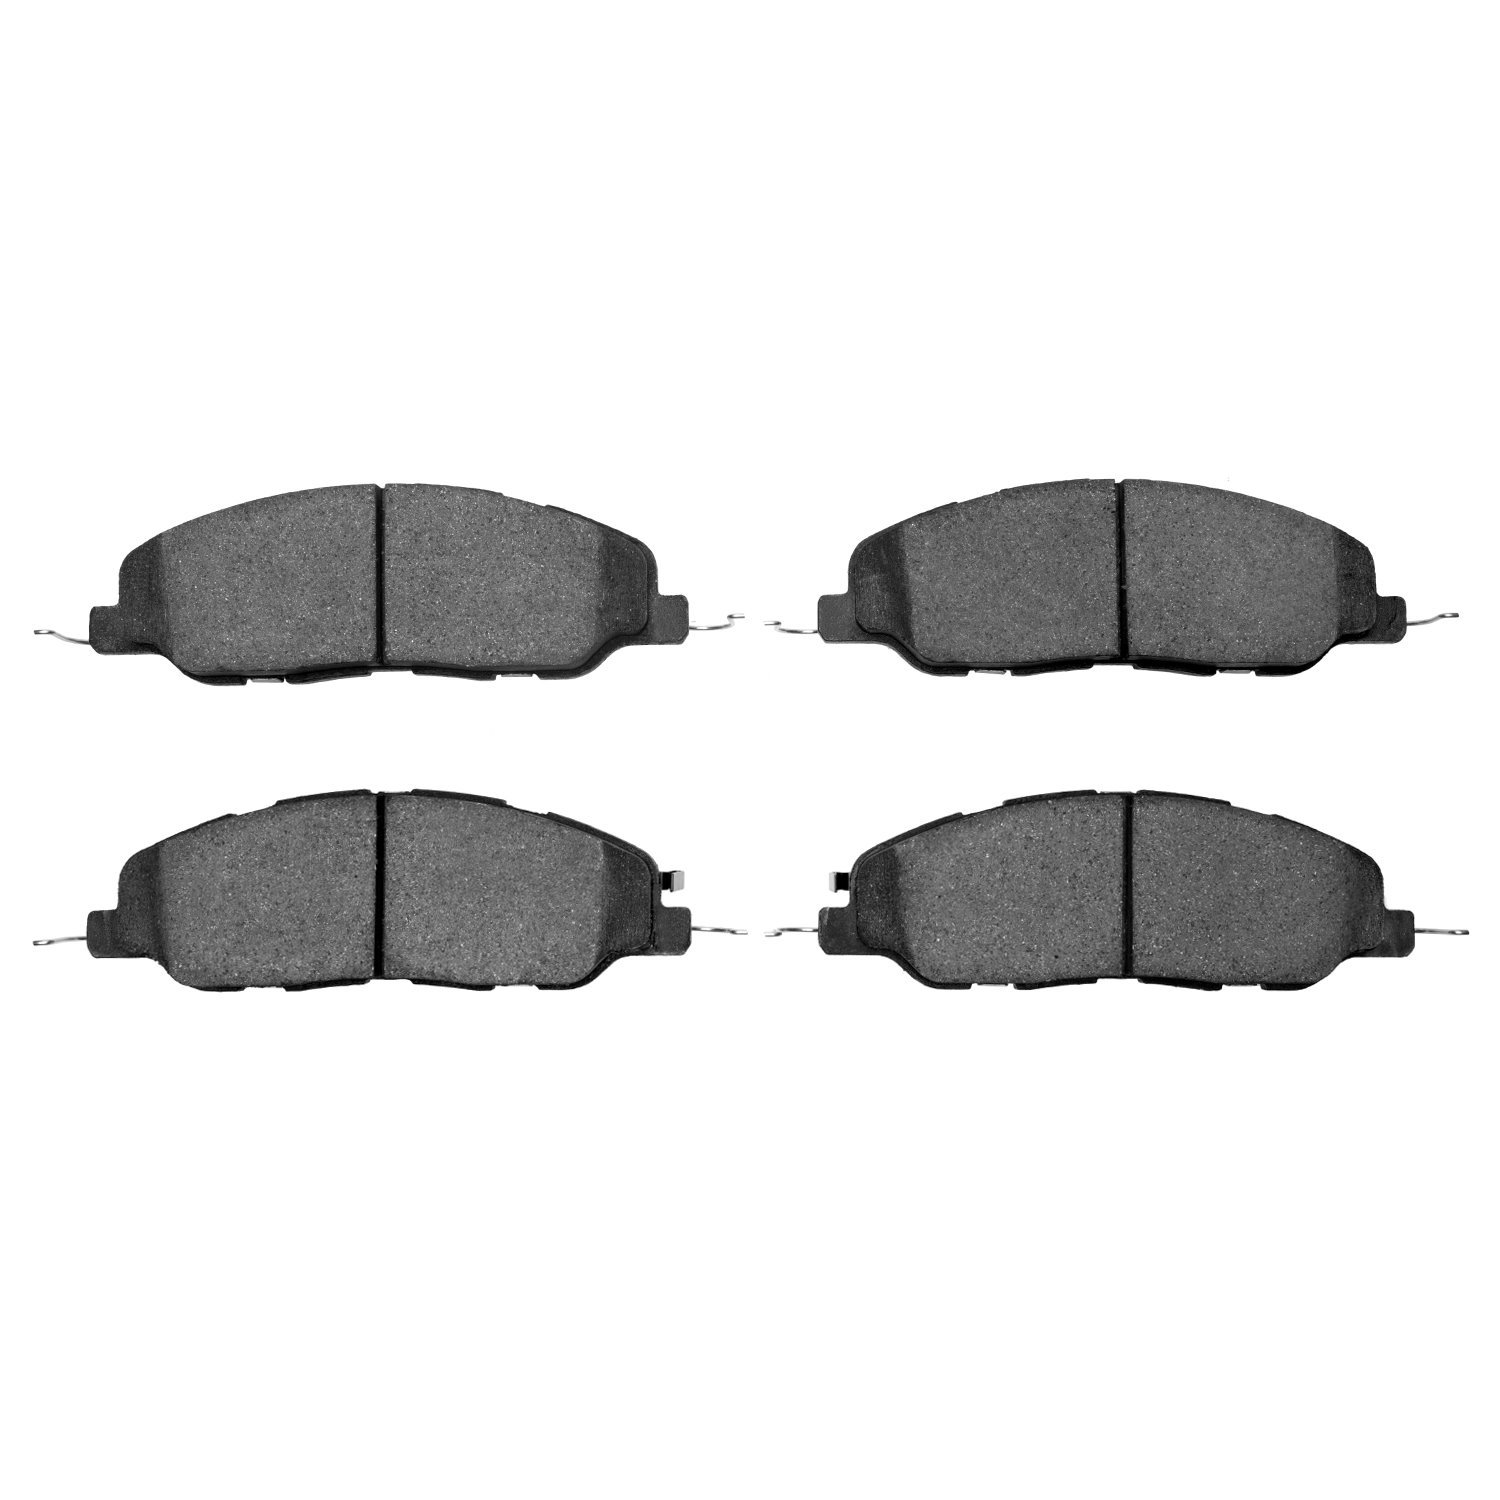 1552-1463-00 5000 Advanced Low-Metallic Brake Pads, 2007-2014 Ford/Lincoln/Mercury/Mazda, Position: Front